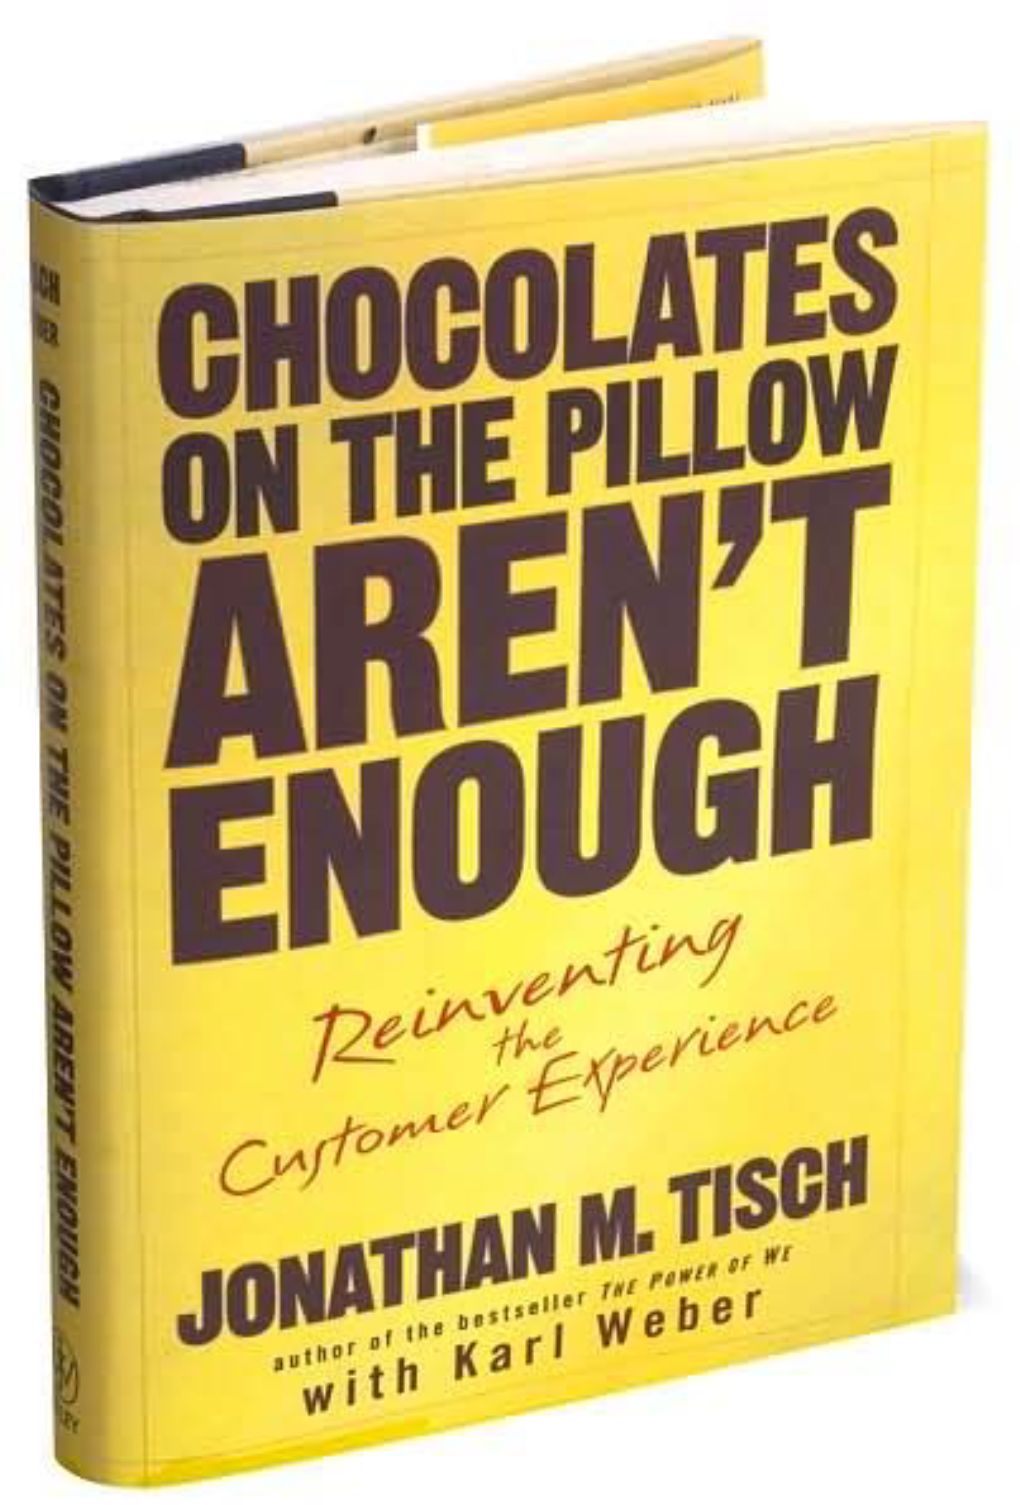 Chocolates on the Pillow Aren't Enough: Reinventing the Customer